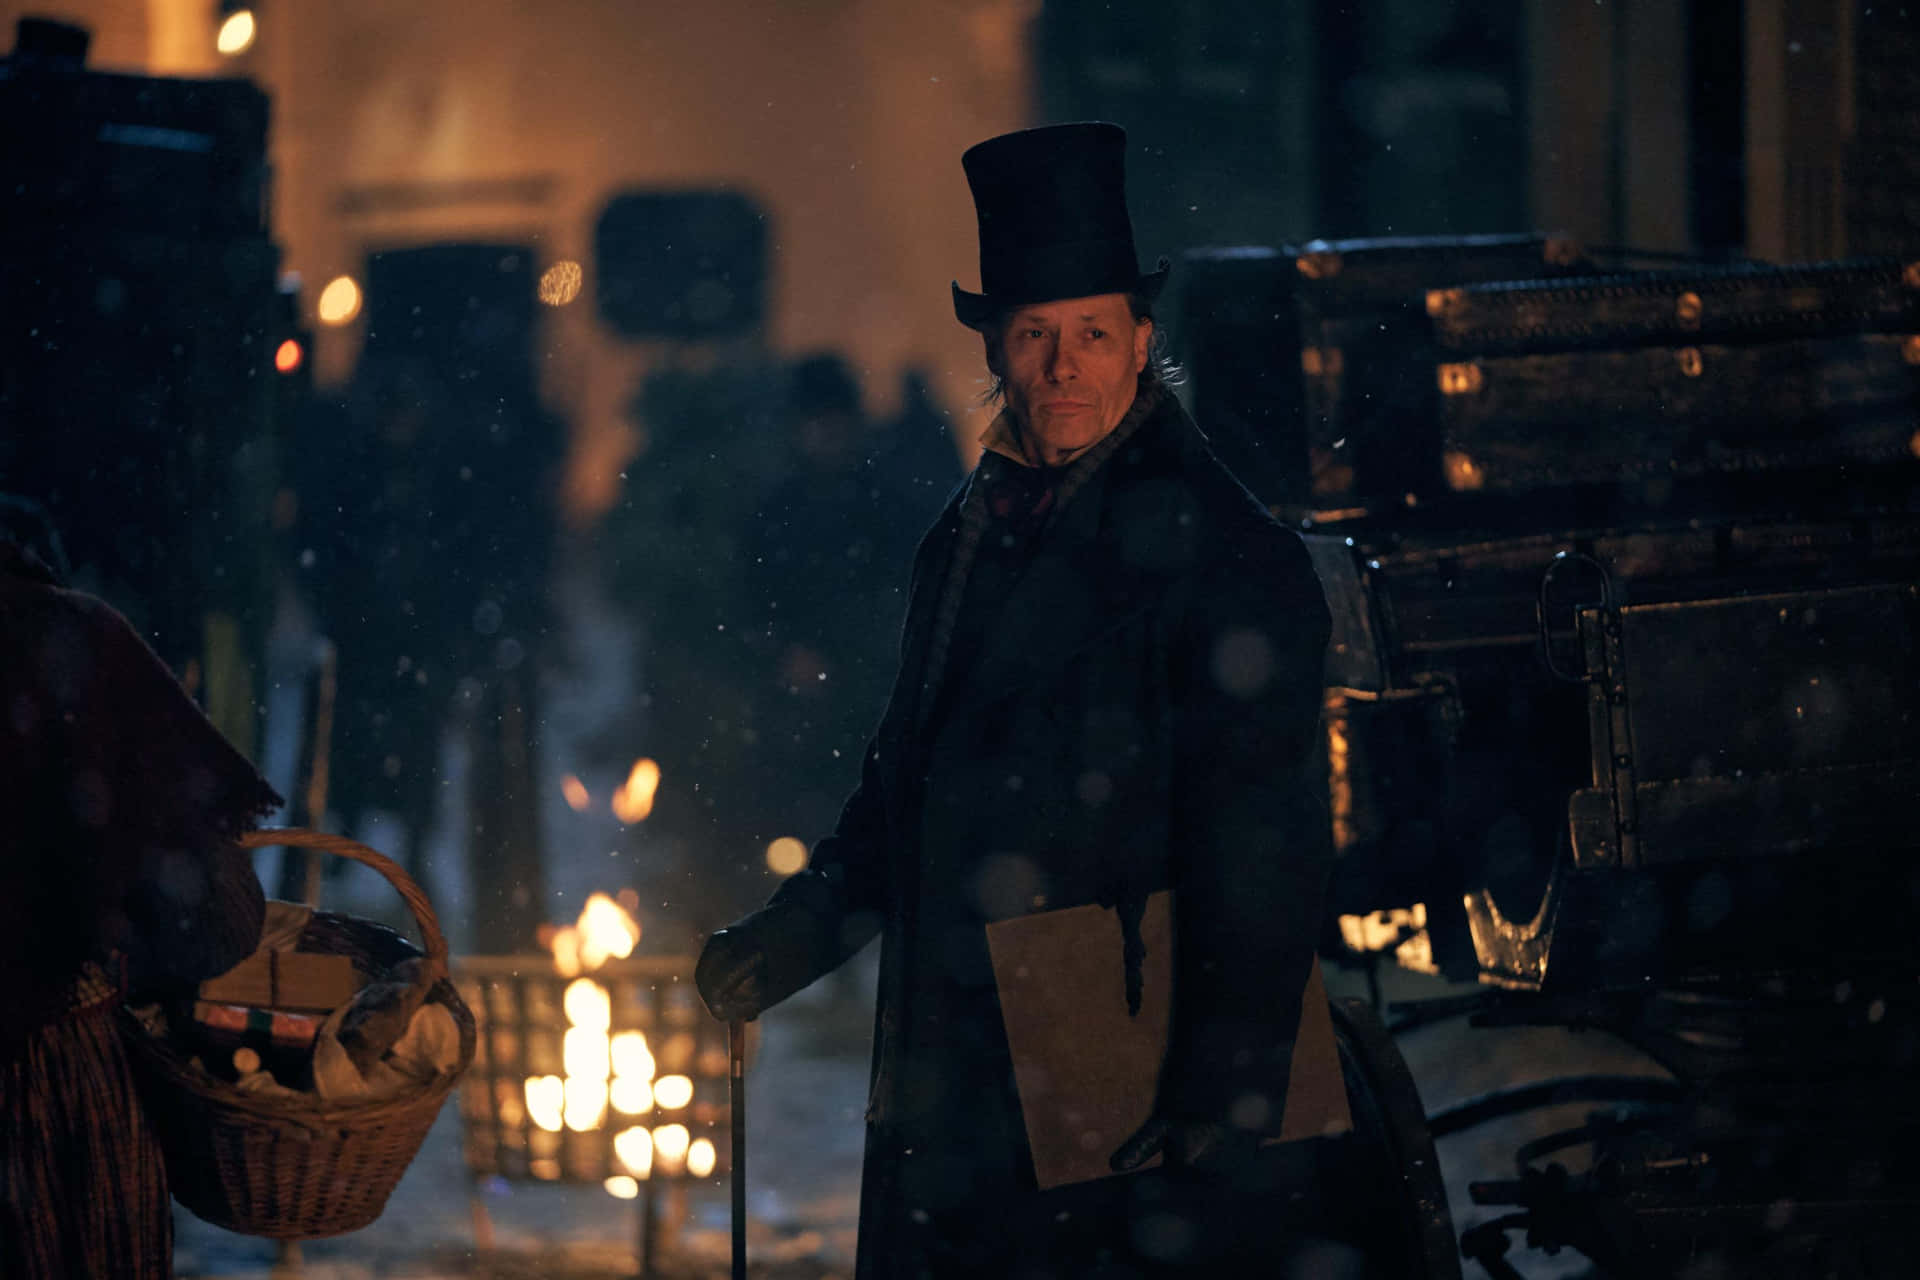 A Man In A Top Hat And A Basket Walking Through The Snow